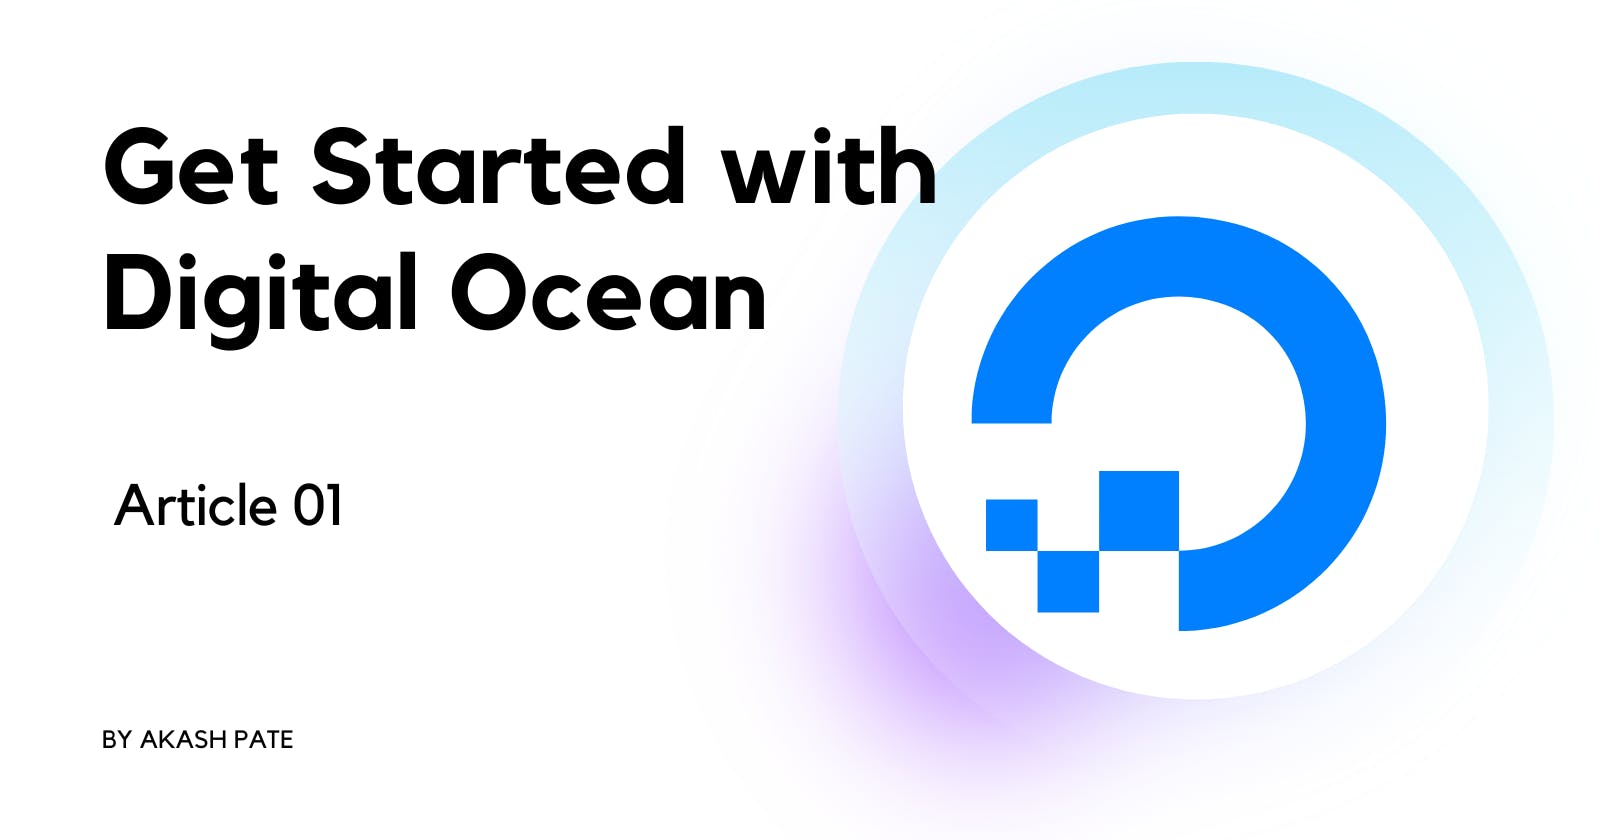 Get started with the Digital Ocean